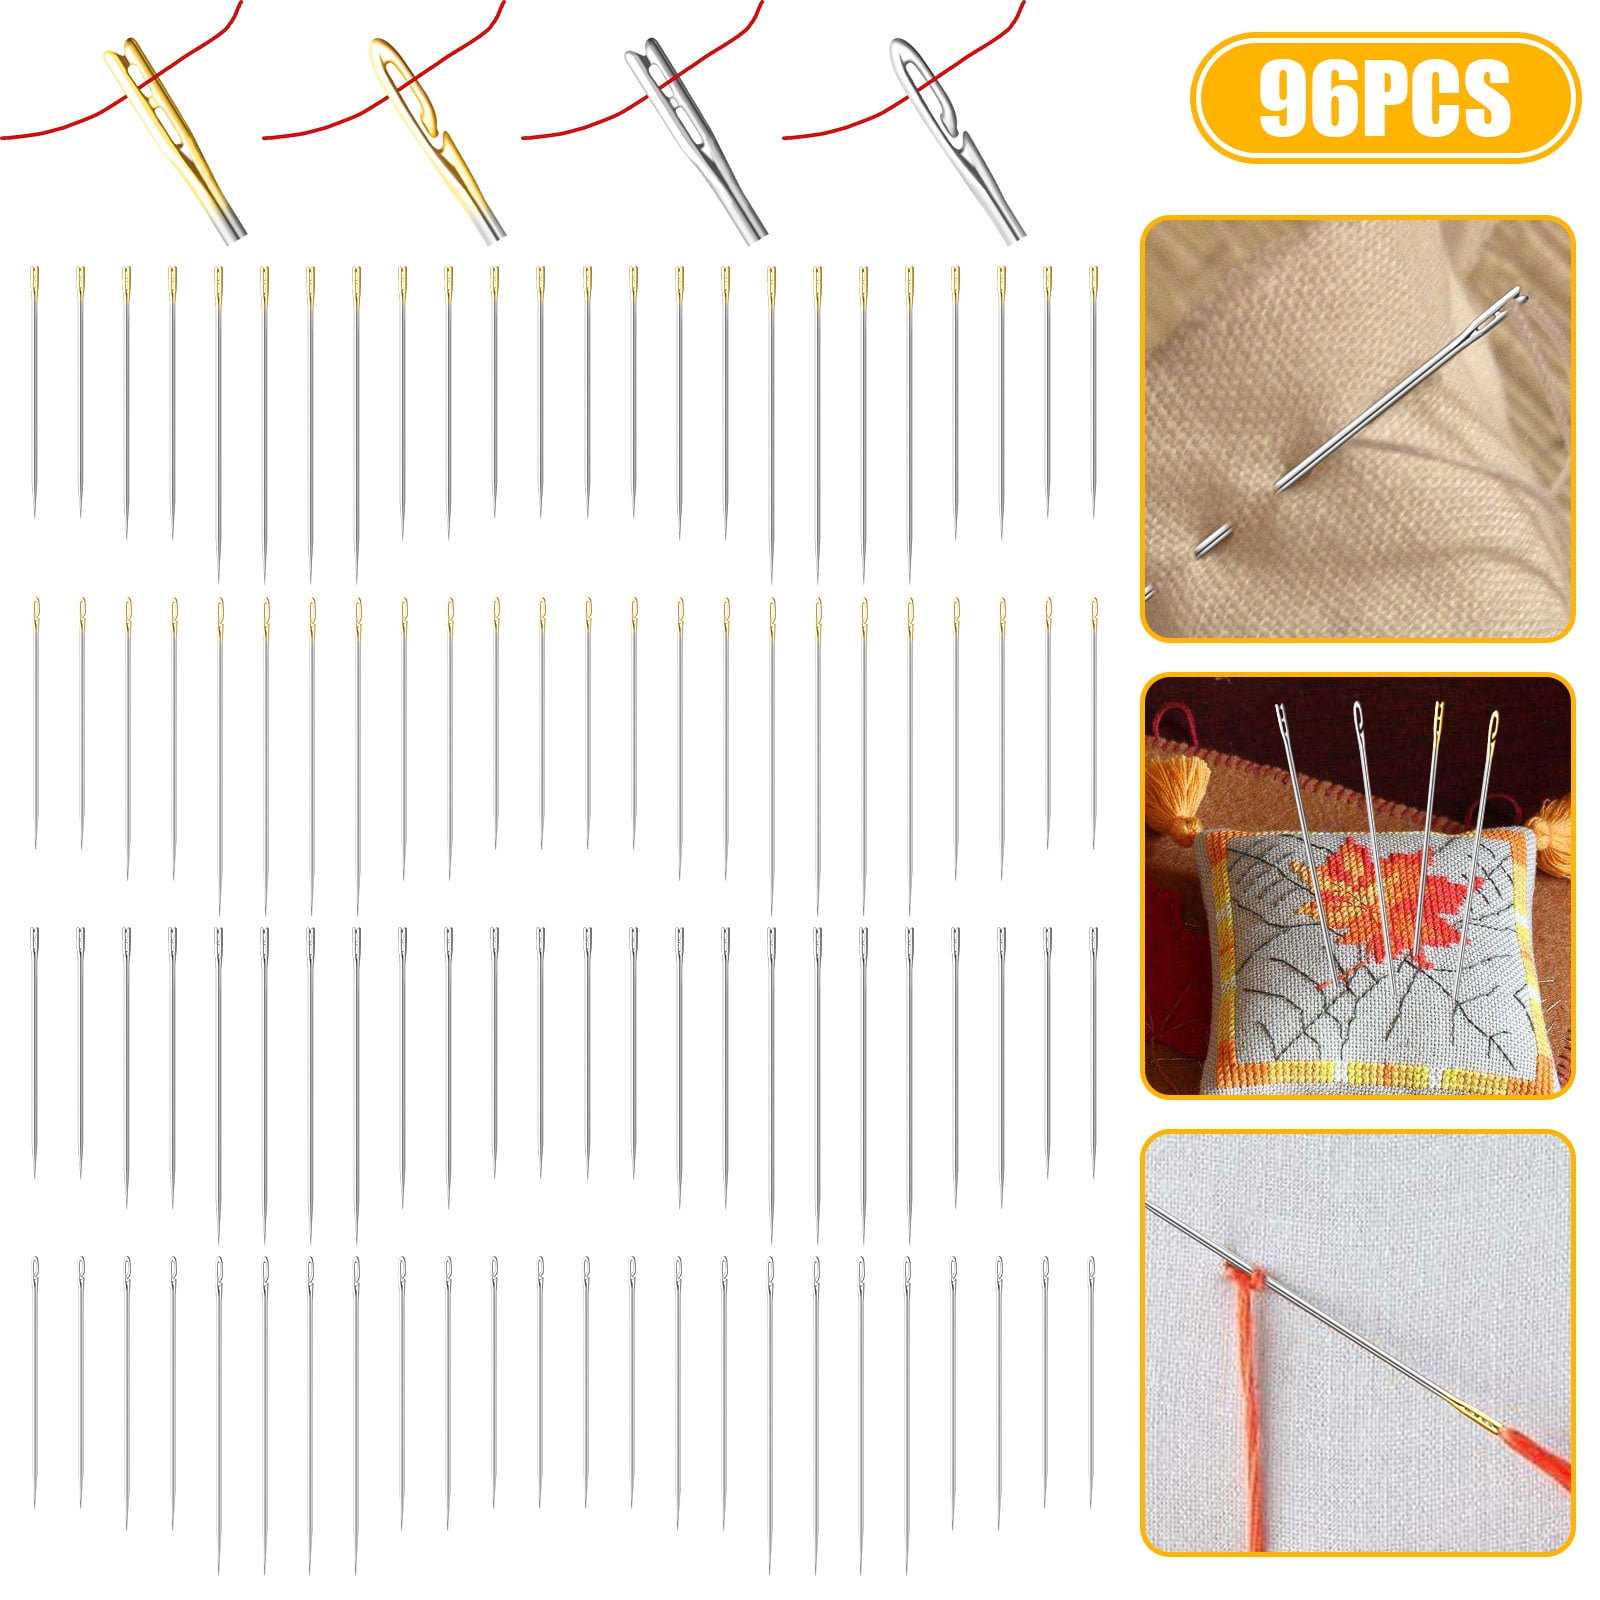 OEAYA 12pcs Sewing Needles,Self Threading Hand Sewing Needles with Wooden Needle Case,3 Sizes Needles for Sewing, Embroidery Needles for Hand Sewing